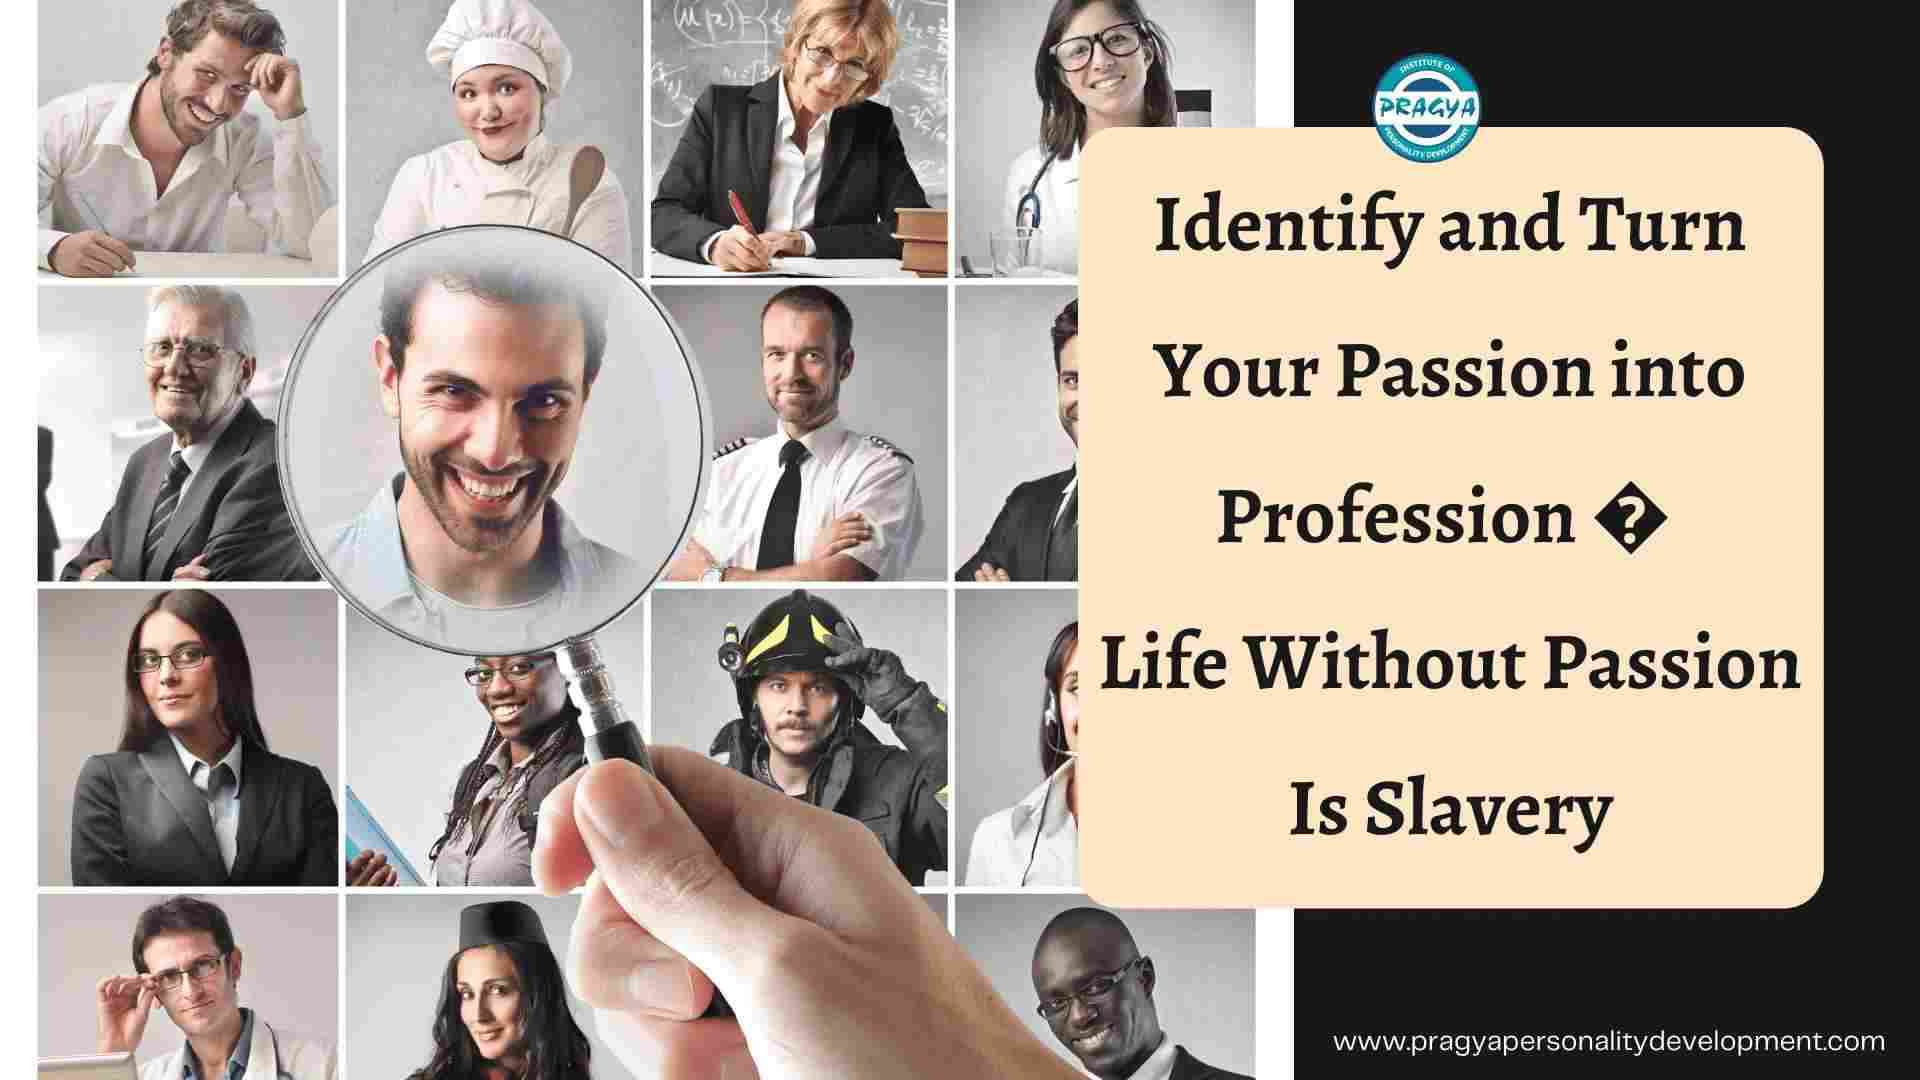 Identify and Turn Your Passion into Profession - Life Without Passion Is Slavery